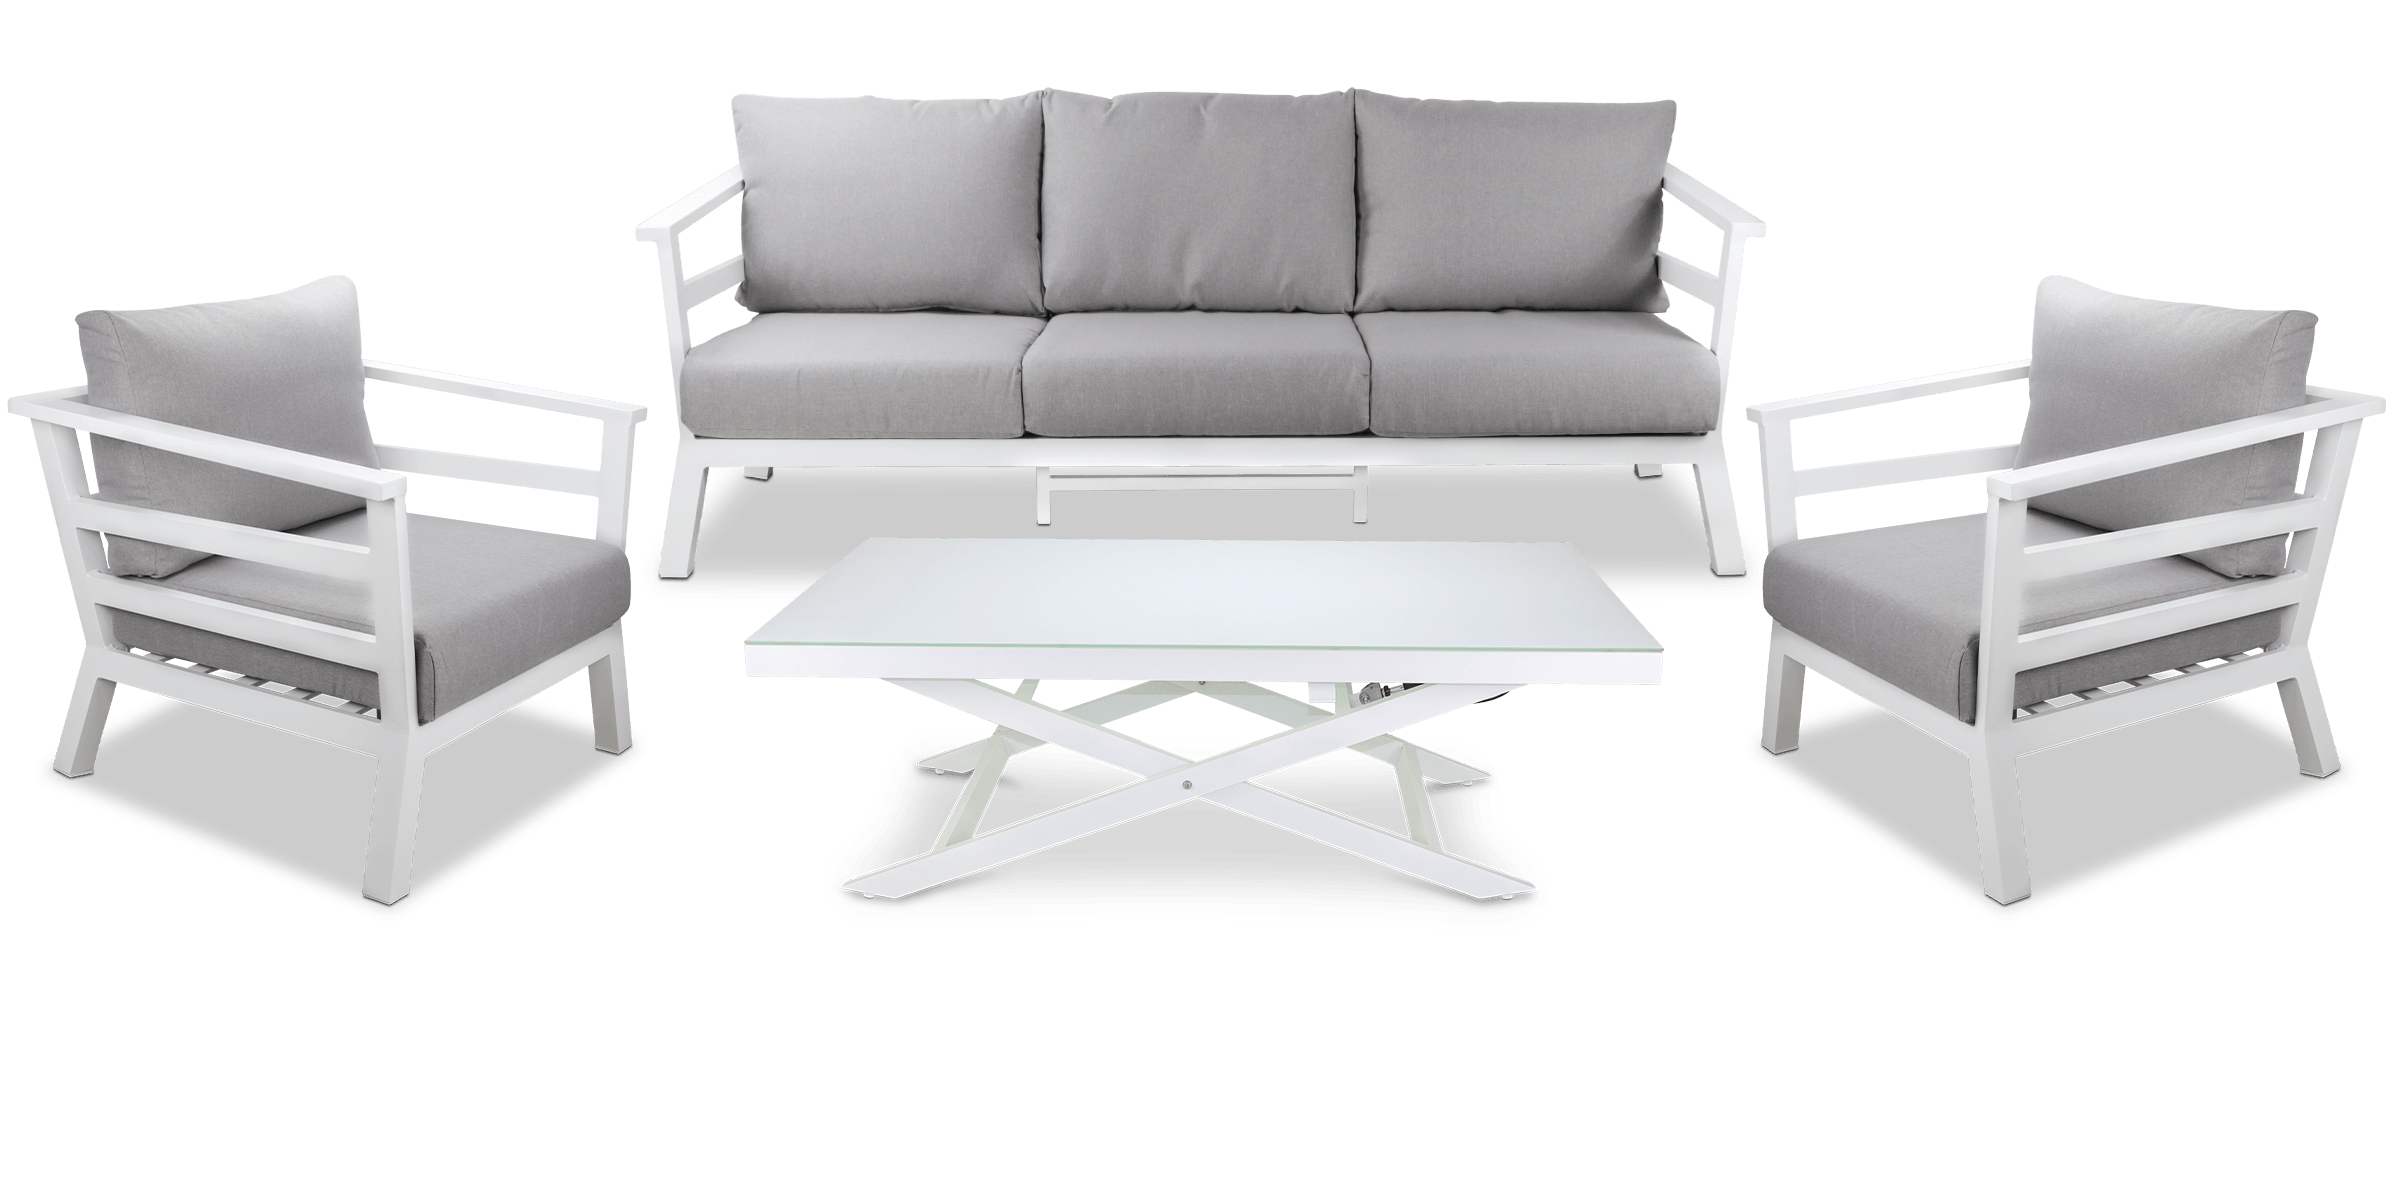 Aveiro 3 Seater with 2x Armchairs and Mykonos Adjustable Coffee Table in Arctic White with Stone Olefin Cushions - The Furniture Shack